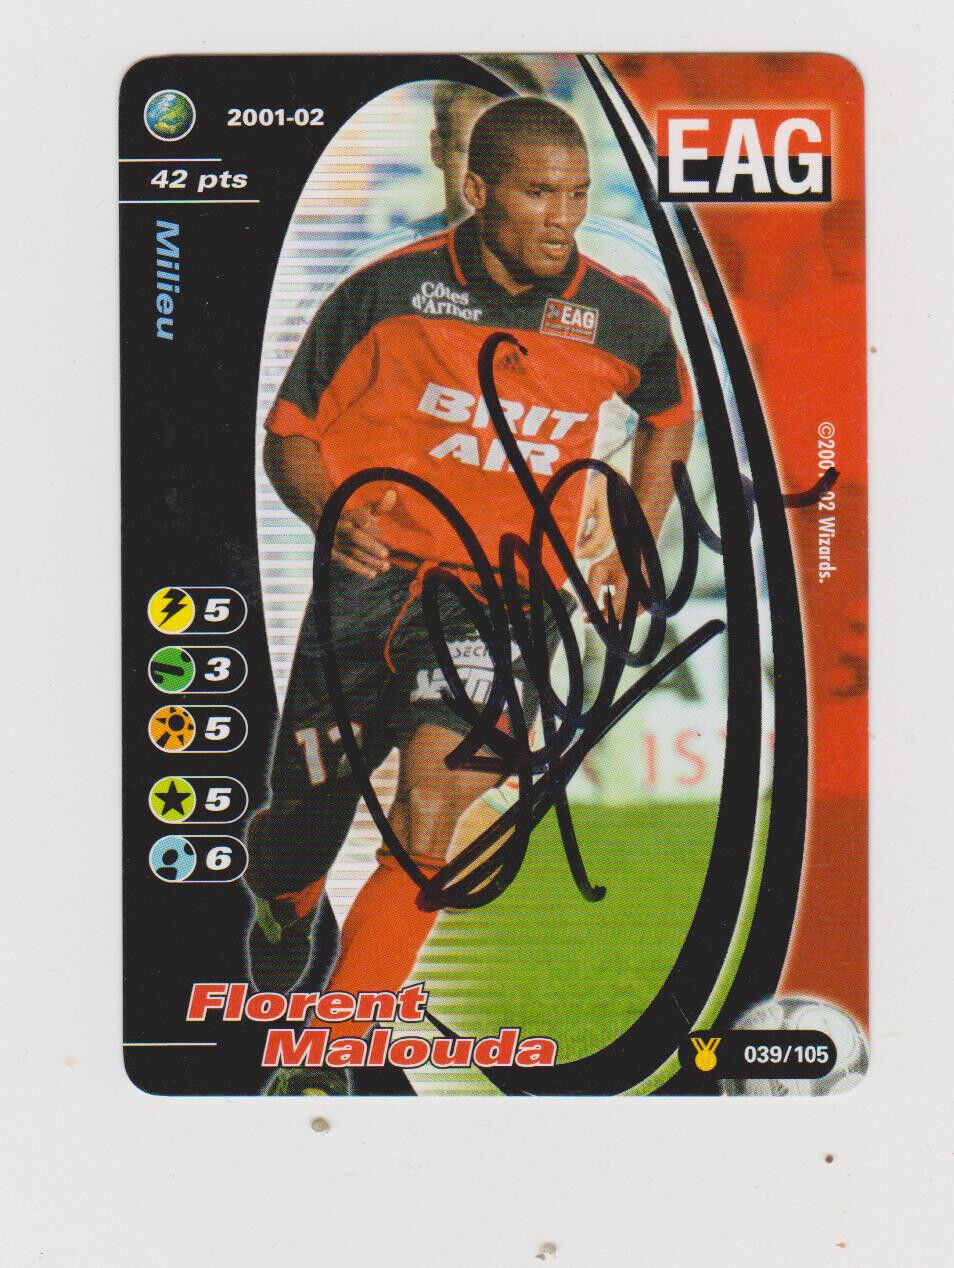 FLORENT MALOUDA 039/105 Signed Football Card Champion FOIL 2001-02 Wizards